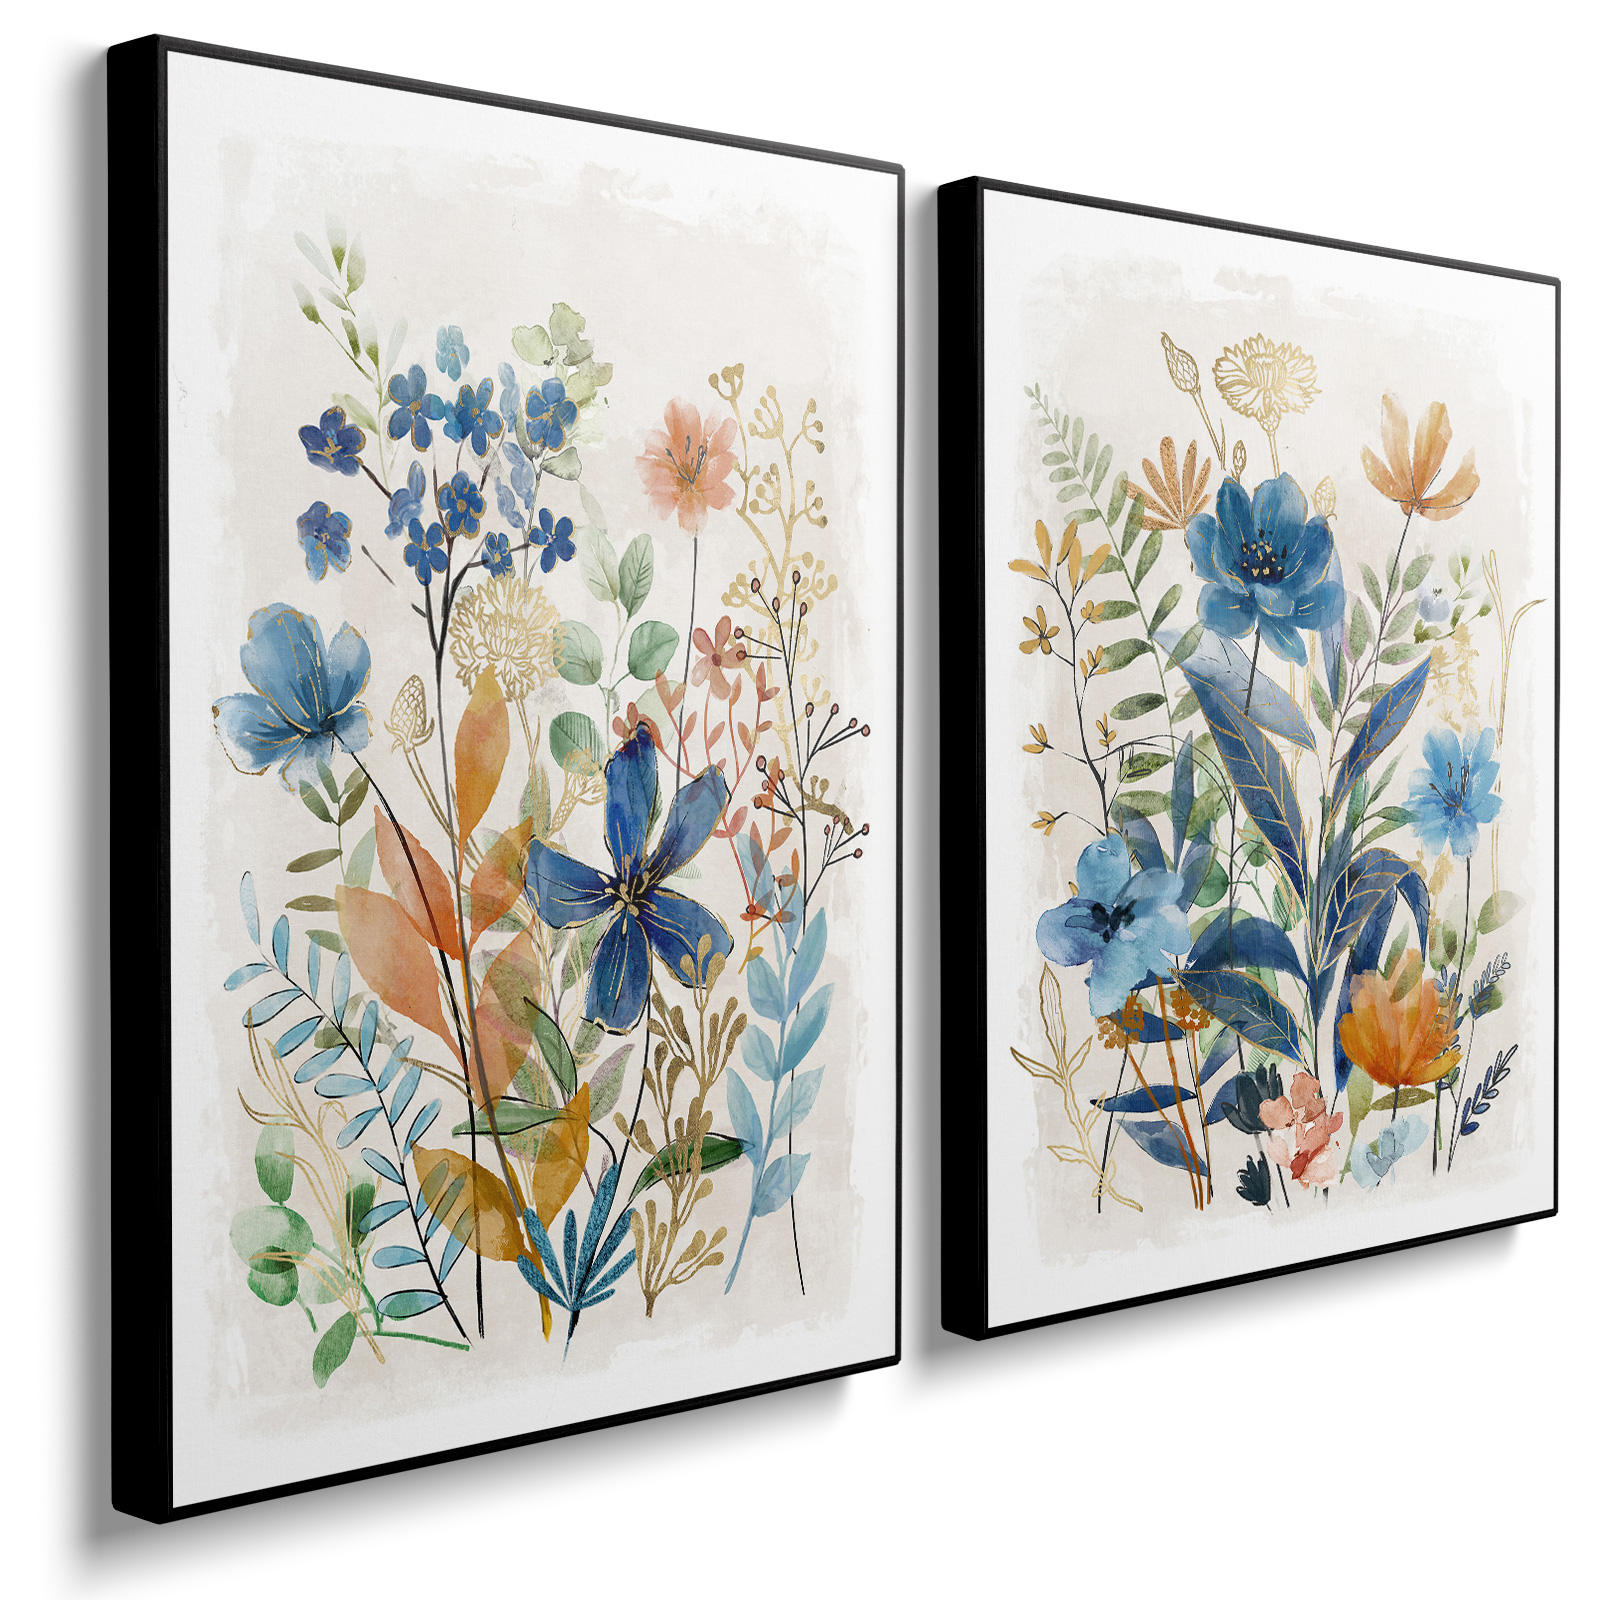 Blooming Bluebonnets and Weeds Framed On Canvas 2-Piece - Lava Odoro-LAVA ODORO